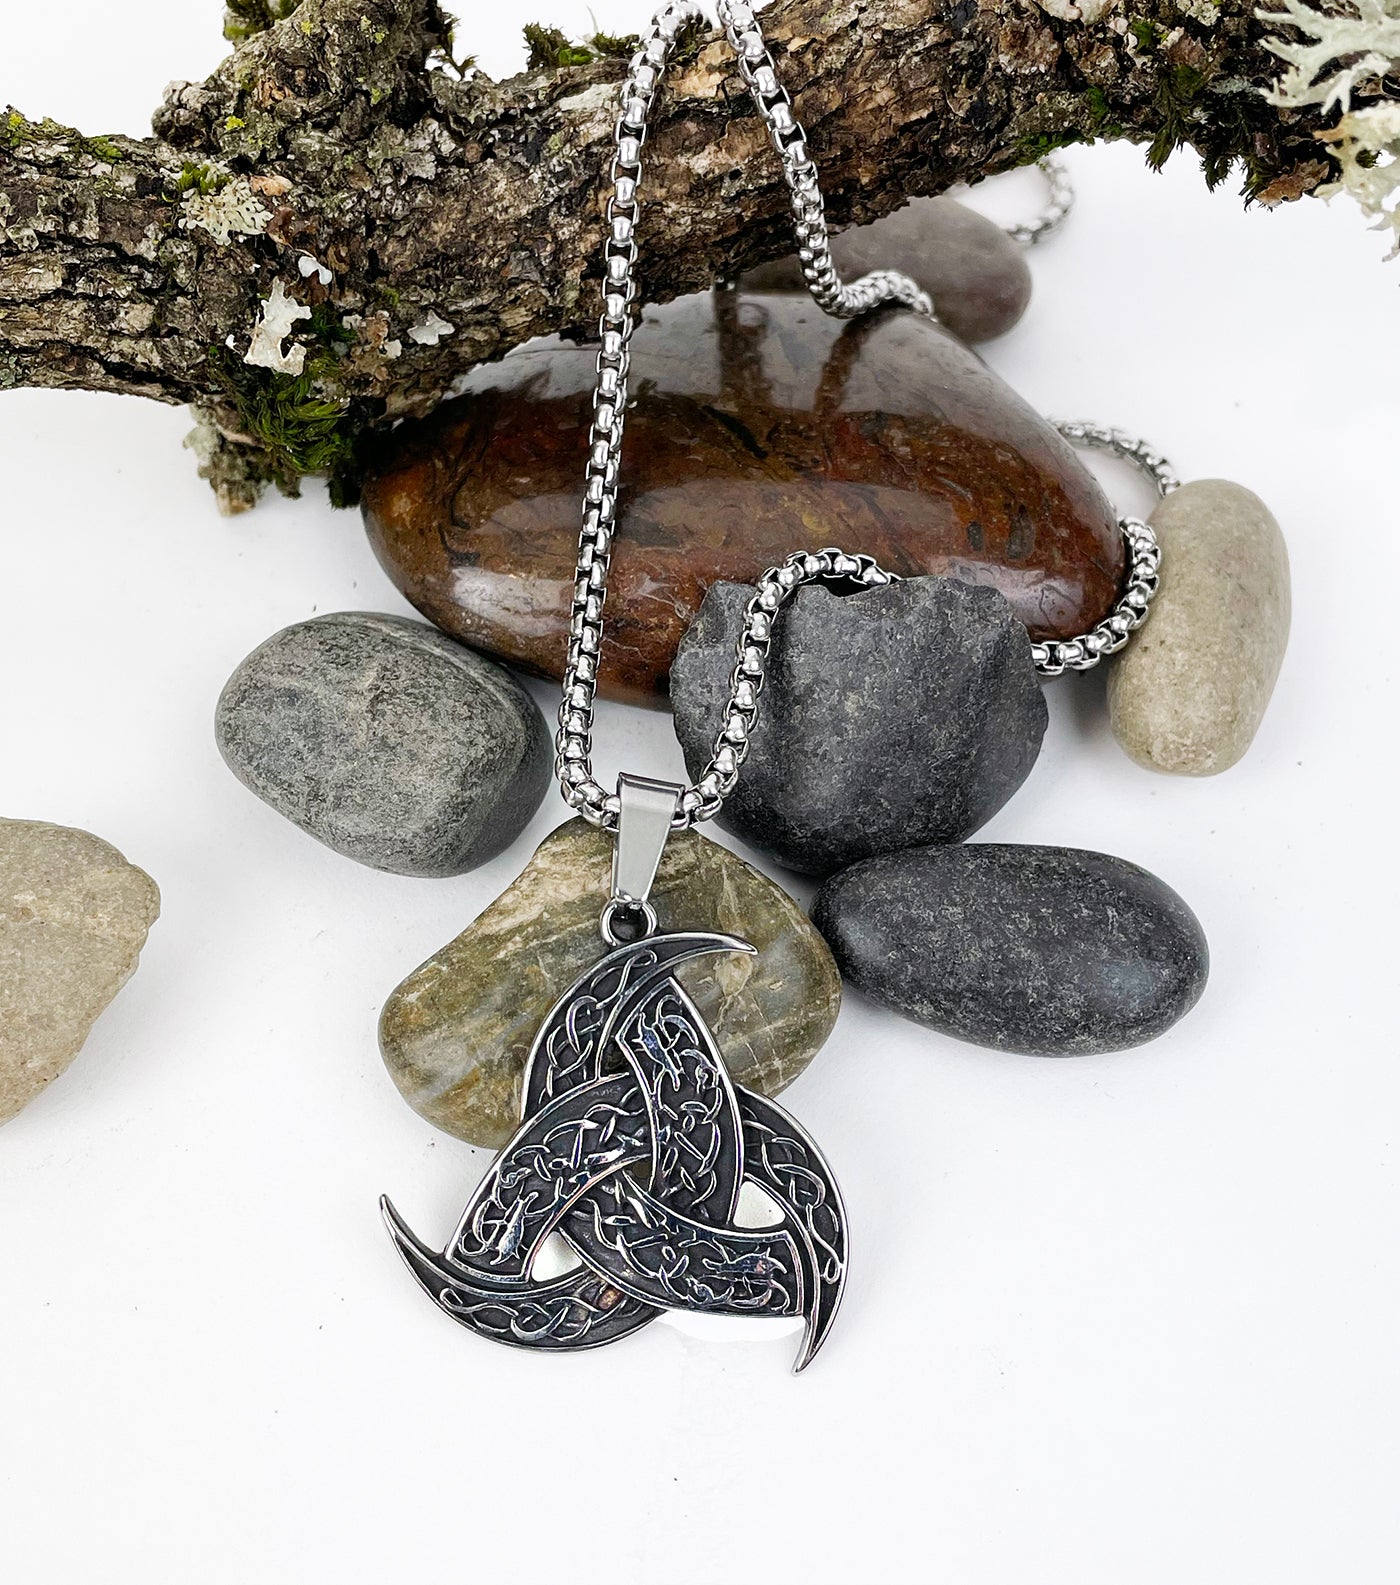 The Triple Horn of Odin Stainless Steel Pendant